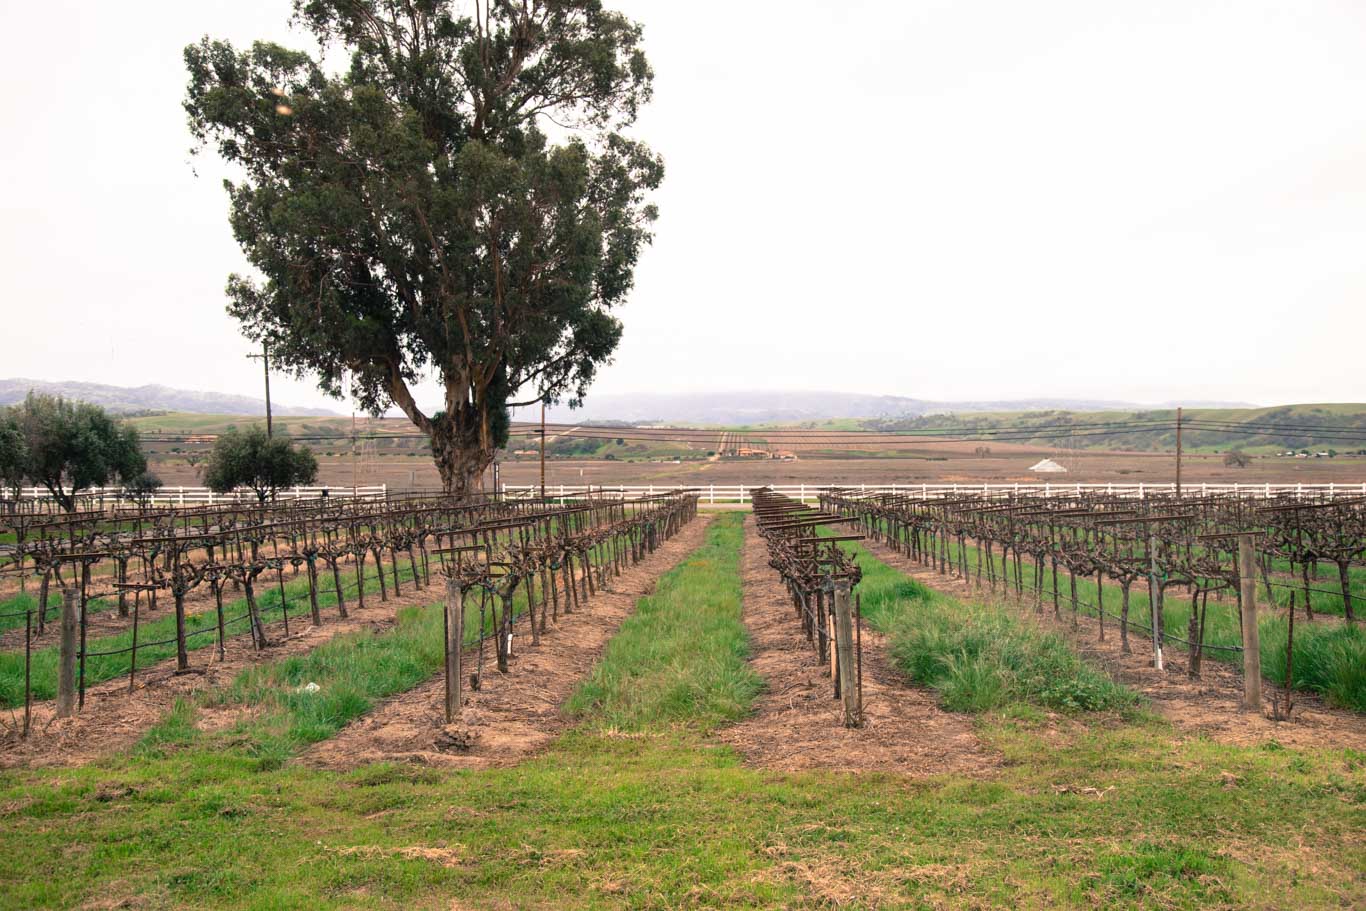 Rows of vines in Livermore Valley